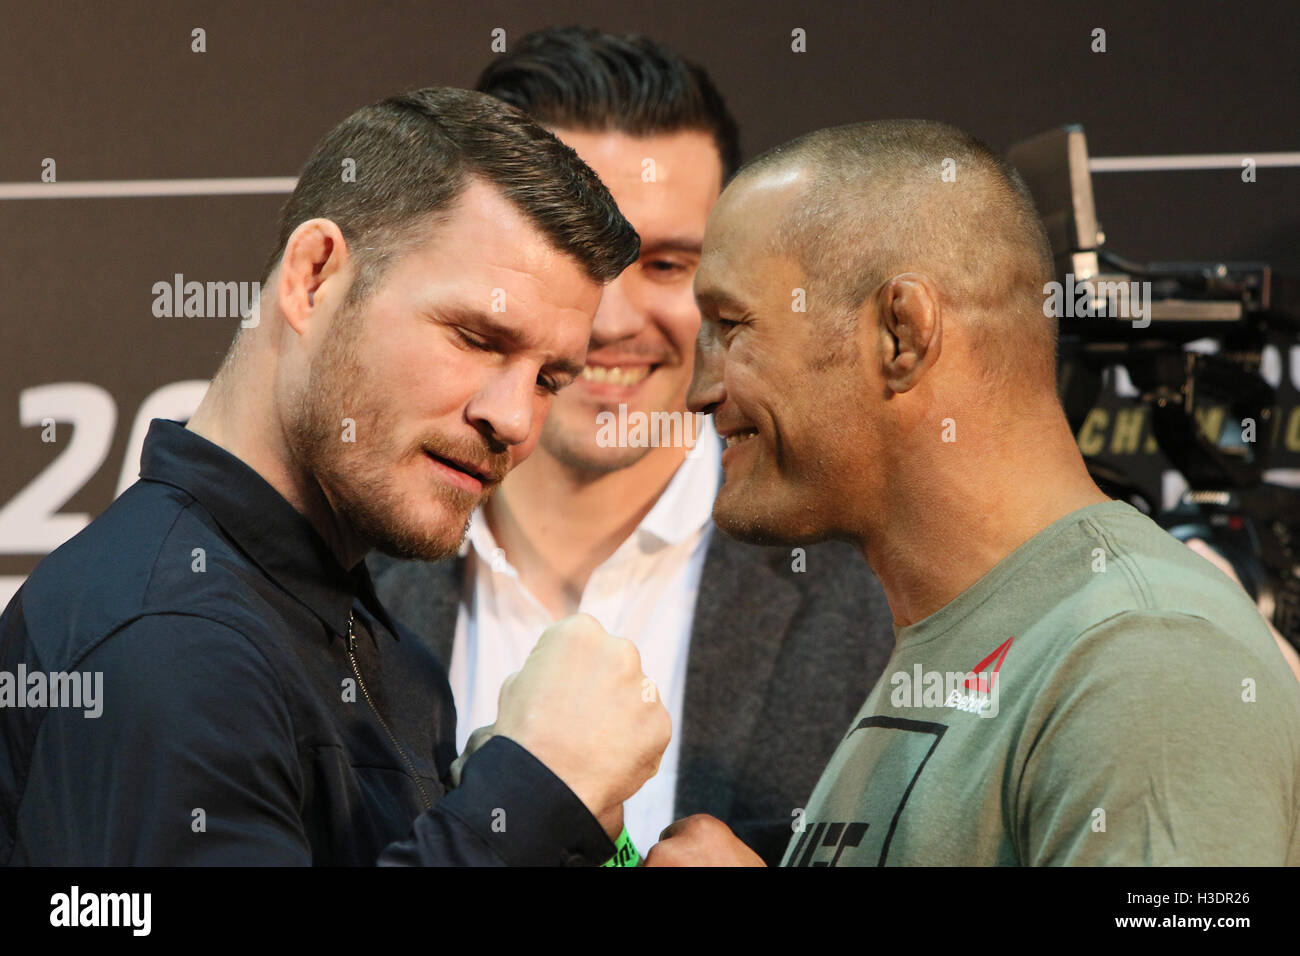 Manchester, UK. 6th October, 2016. UFC 204 - Media Day at Arena Manchester. Thursday the 6 of Oct. 2016. Michael Bisping and Dan Henderson face off ahead of UFC 204.   Credit:  Dan Cooke/Alamy Live News Stock Photo